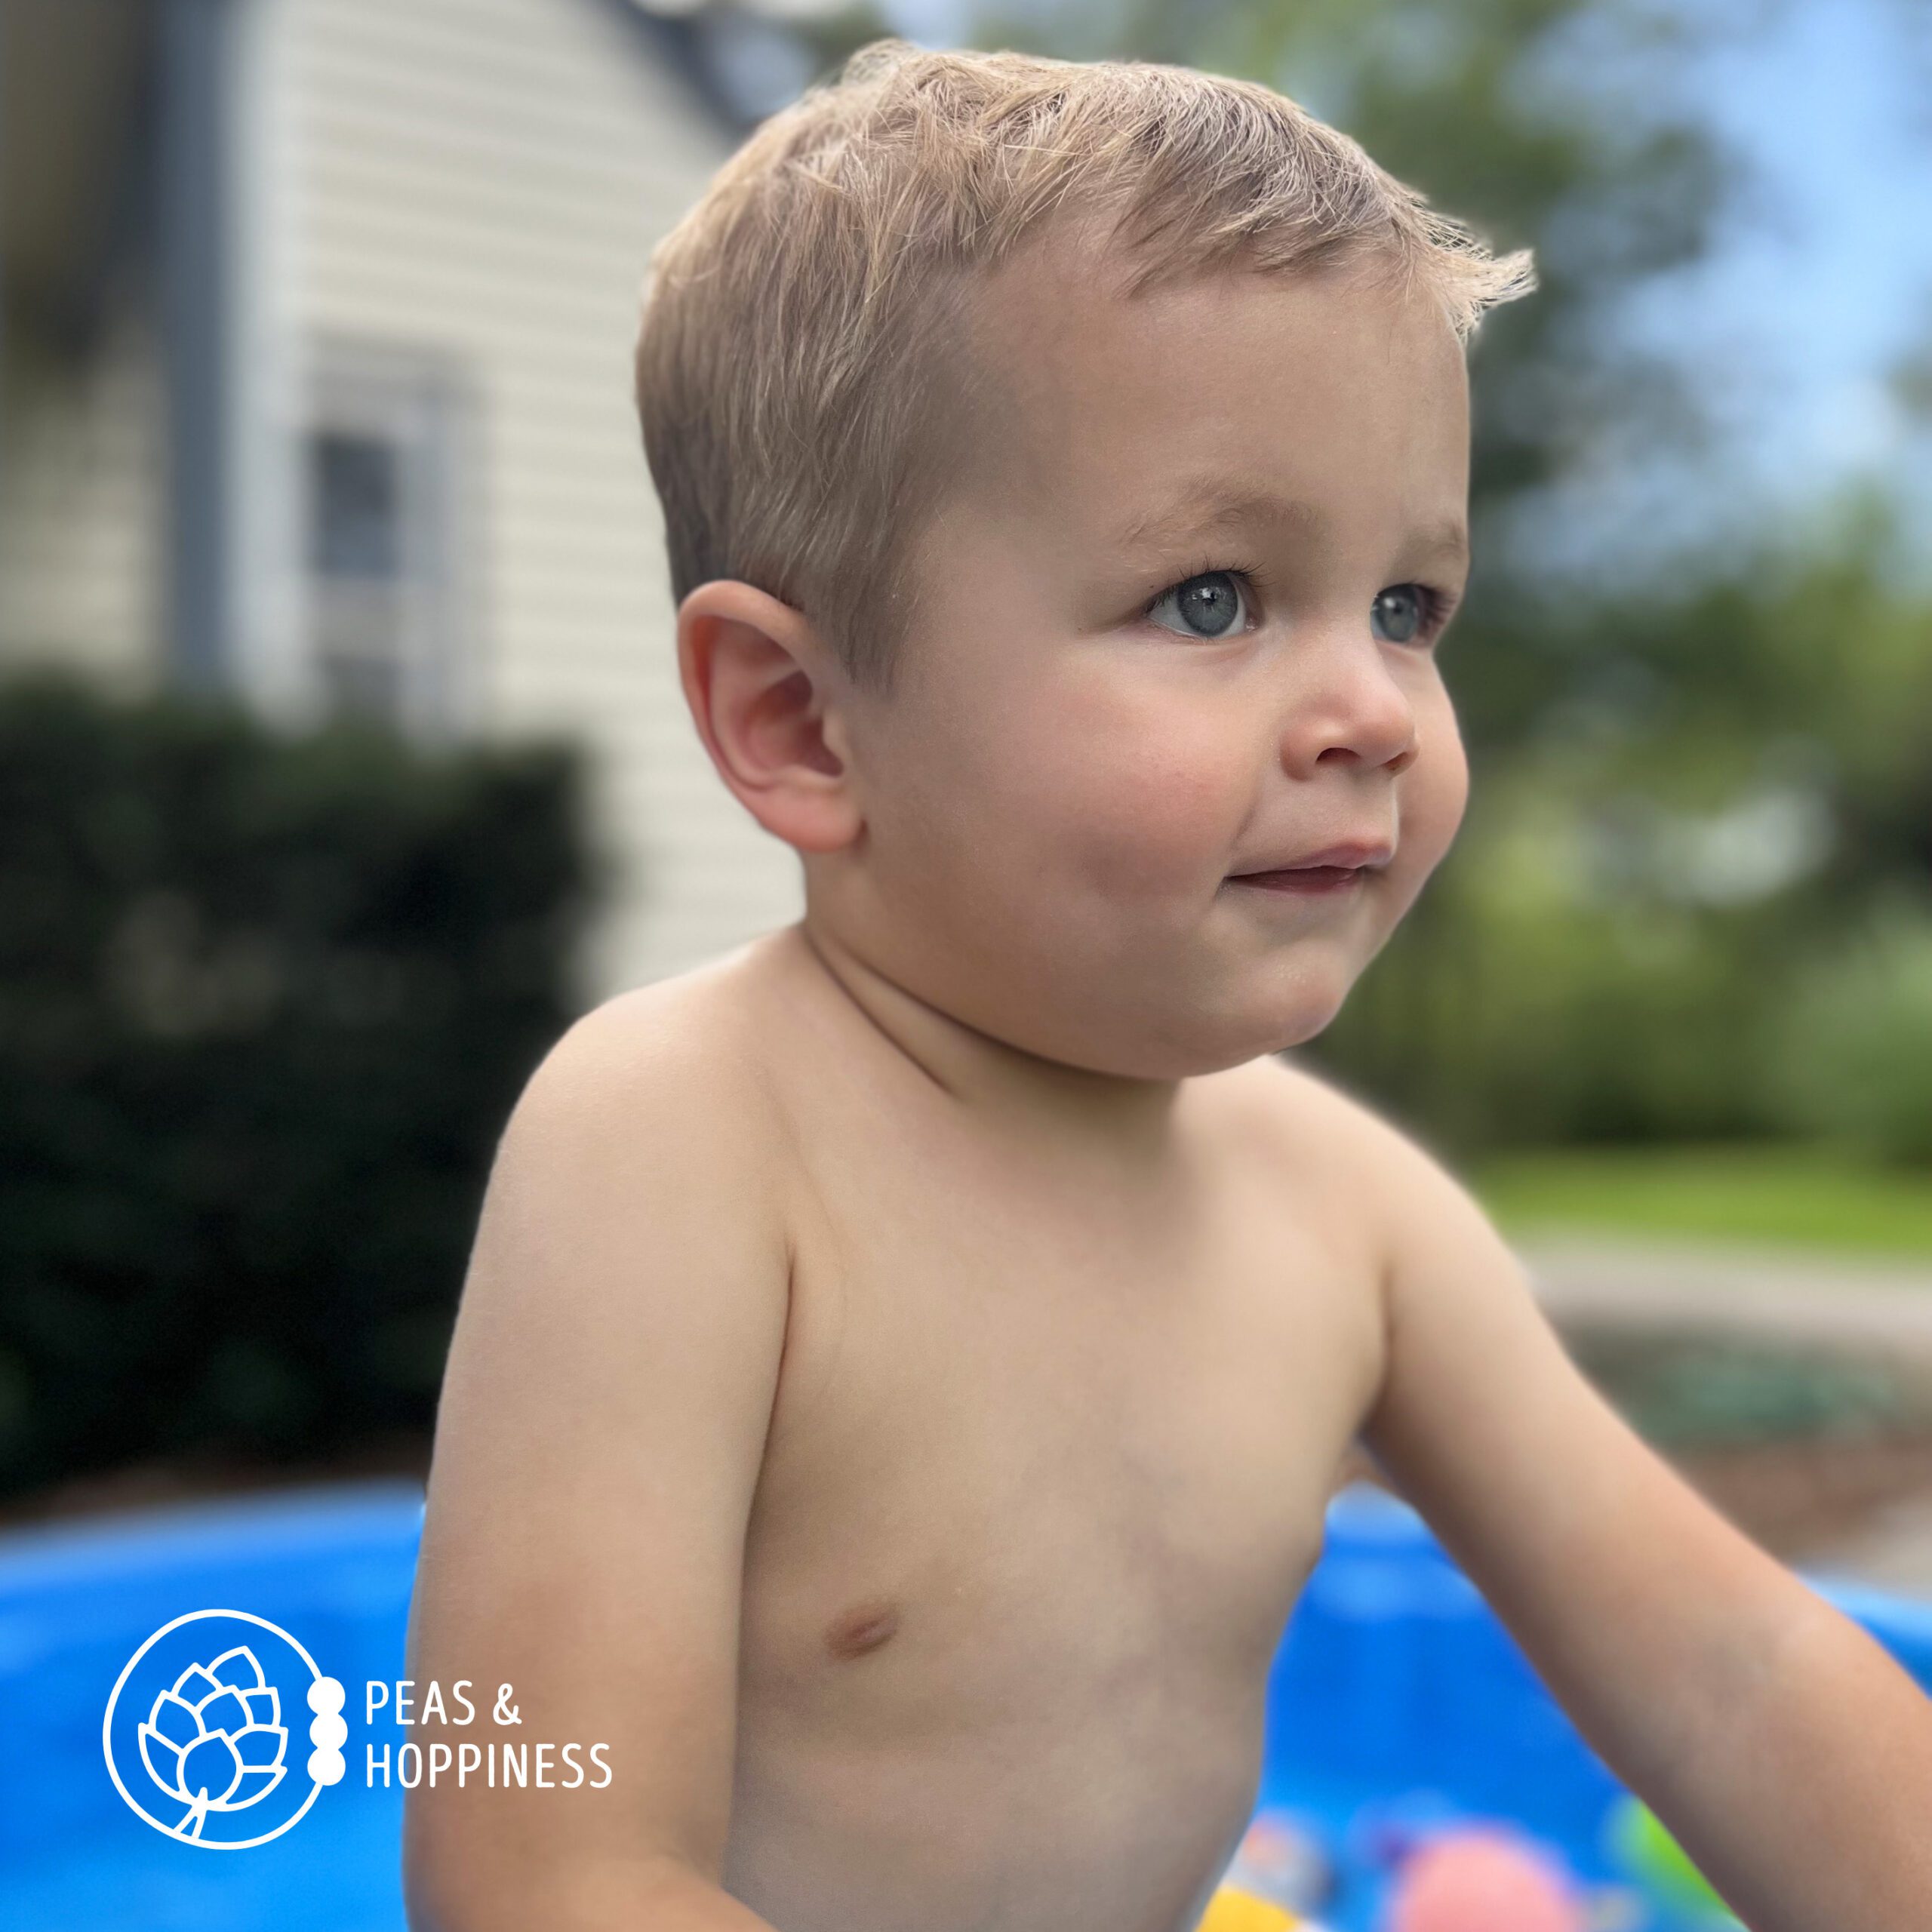 Toddler boy playing in the pool in the summertime